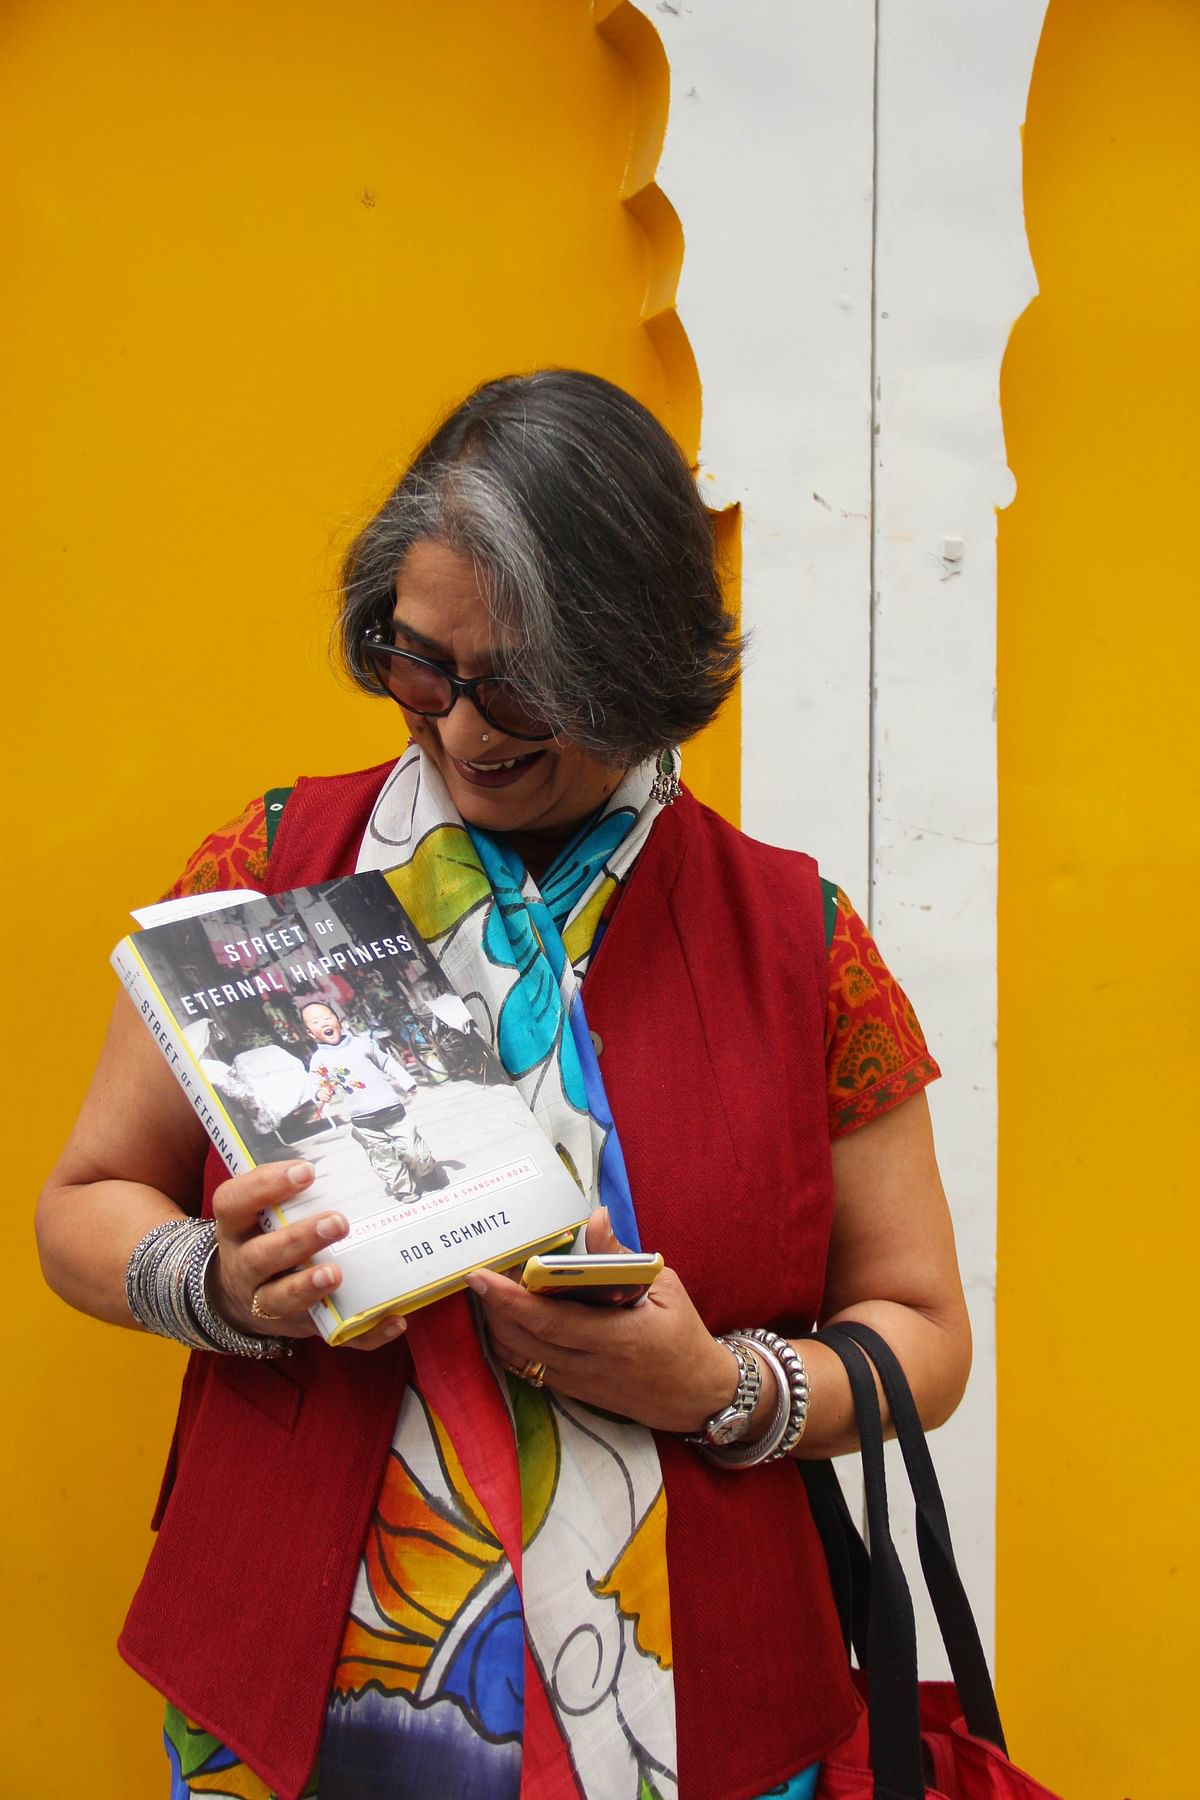 At Jaipur Literature Festival, we meet with interesting subjects that subtly blend fashion and literature together